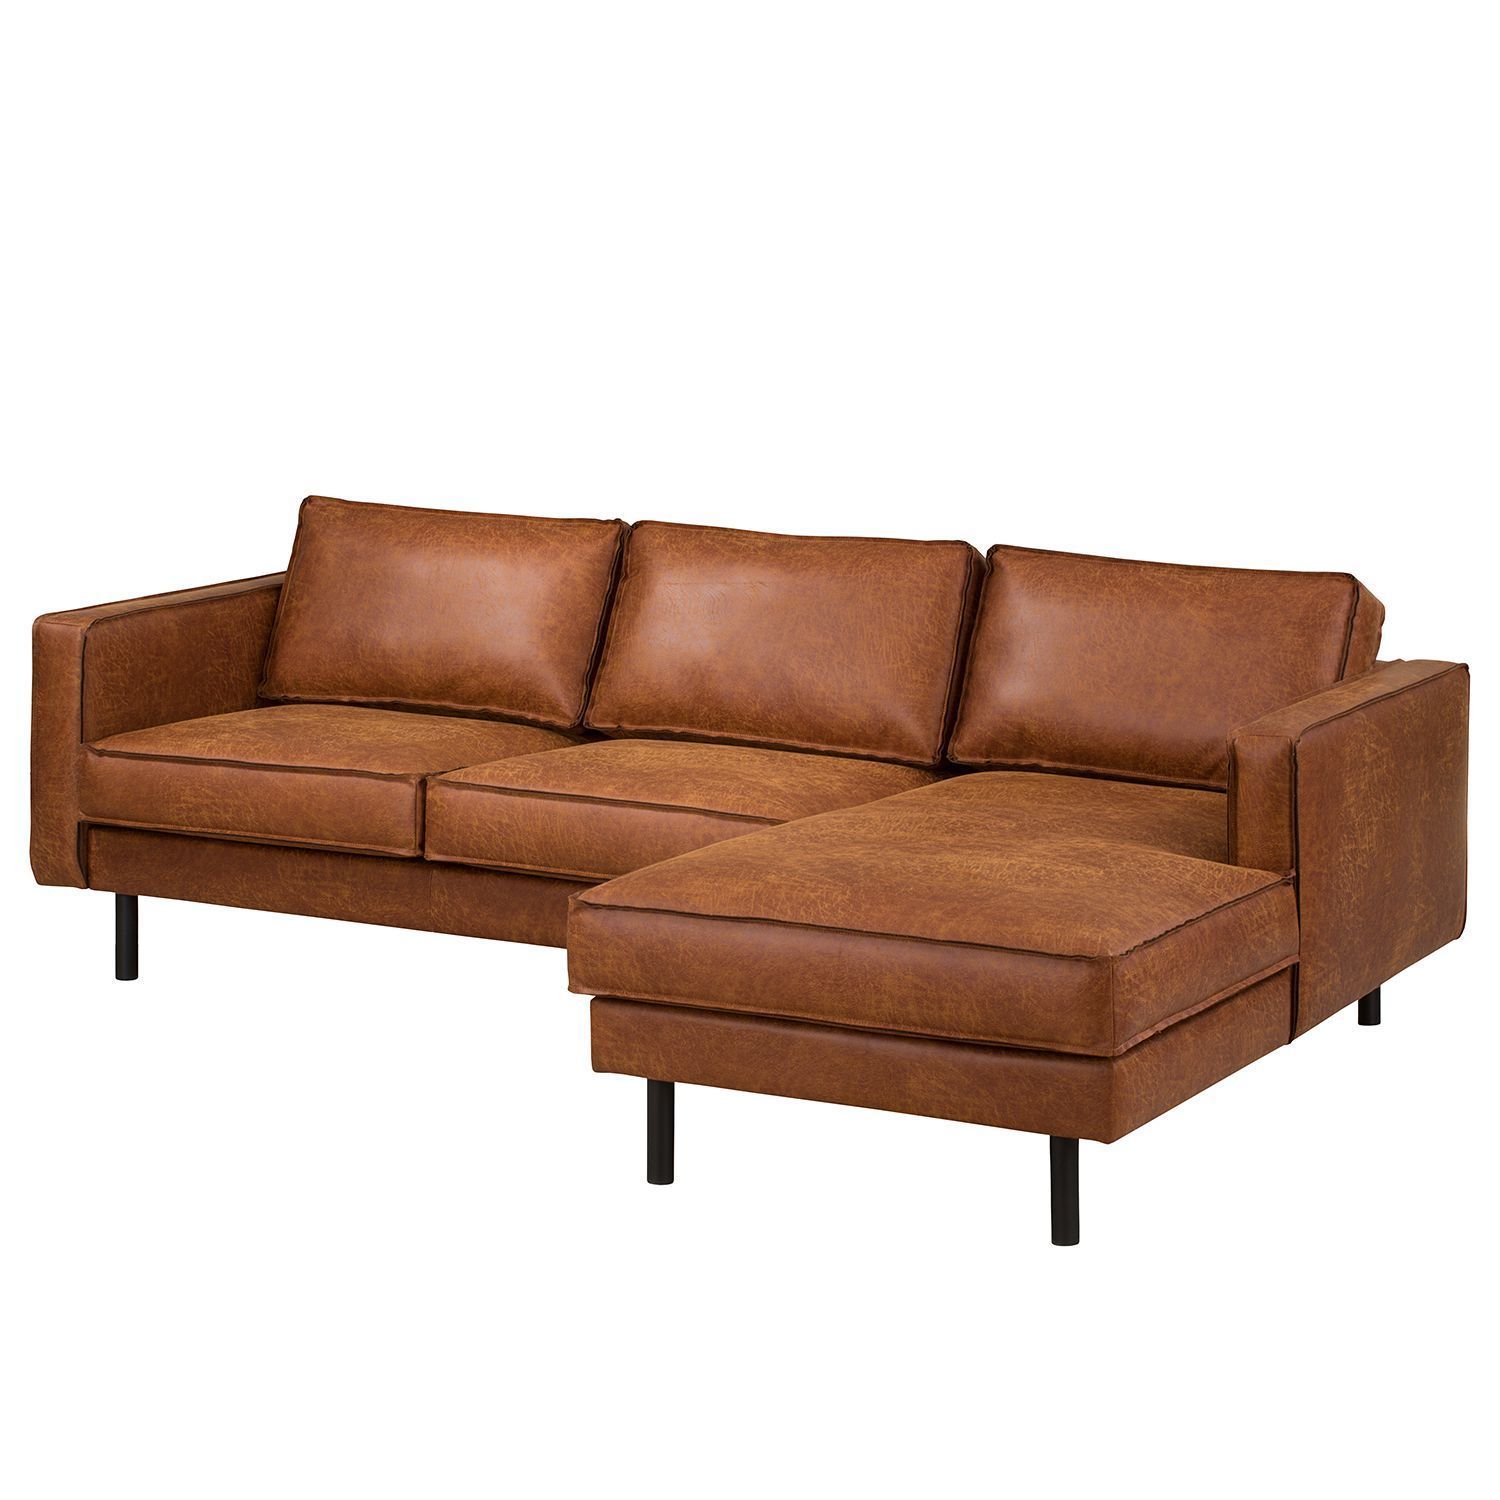 Ecksofa Fort Dodge Antiklederlook | Sofa Fort, Fort Dodge Throughout Florence Mid Century Modern Right Sectional Sofas Cognac Tan (View 1 of 15)